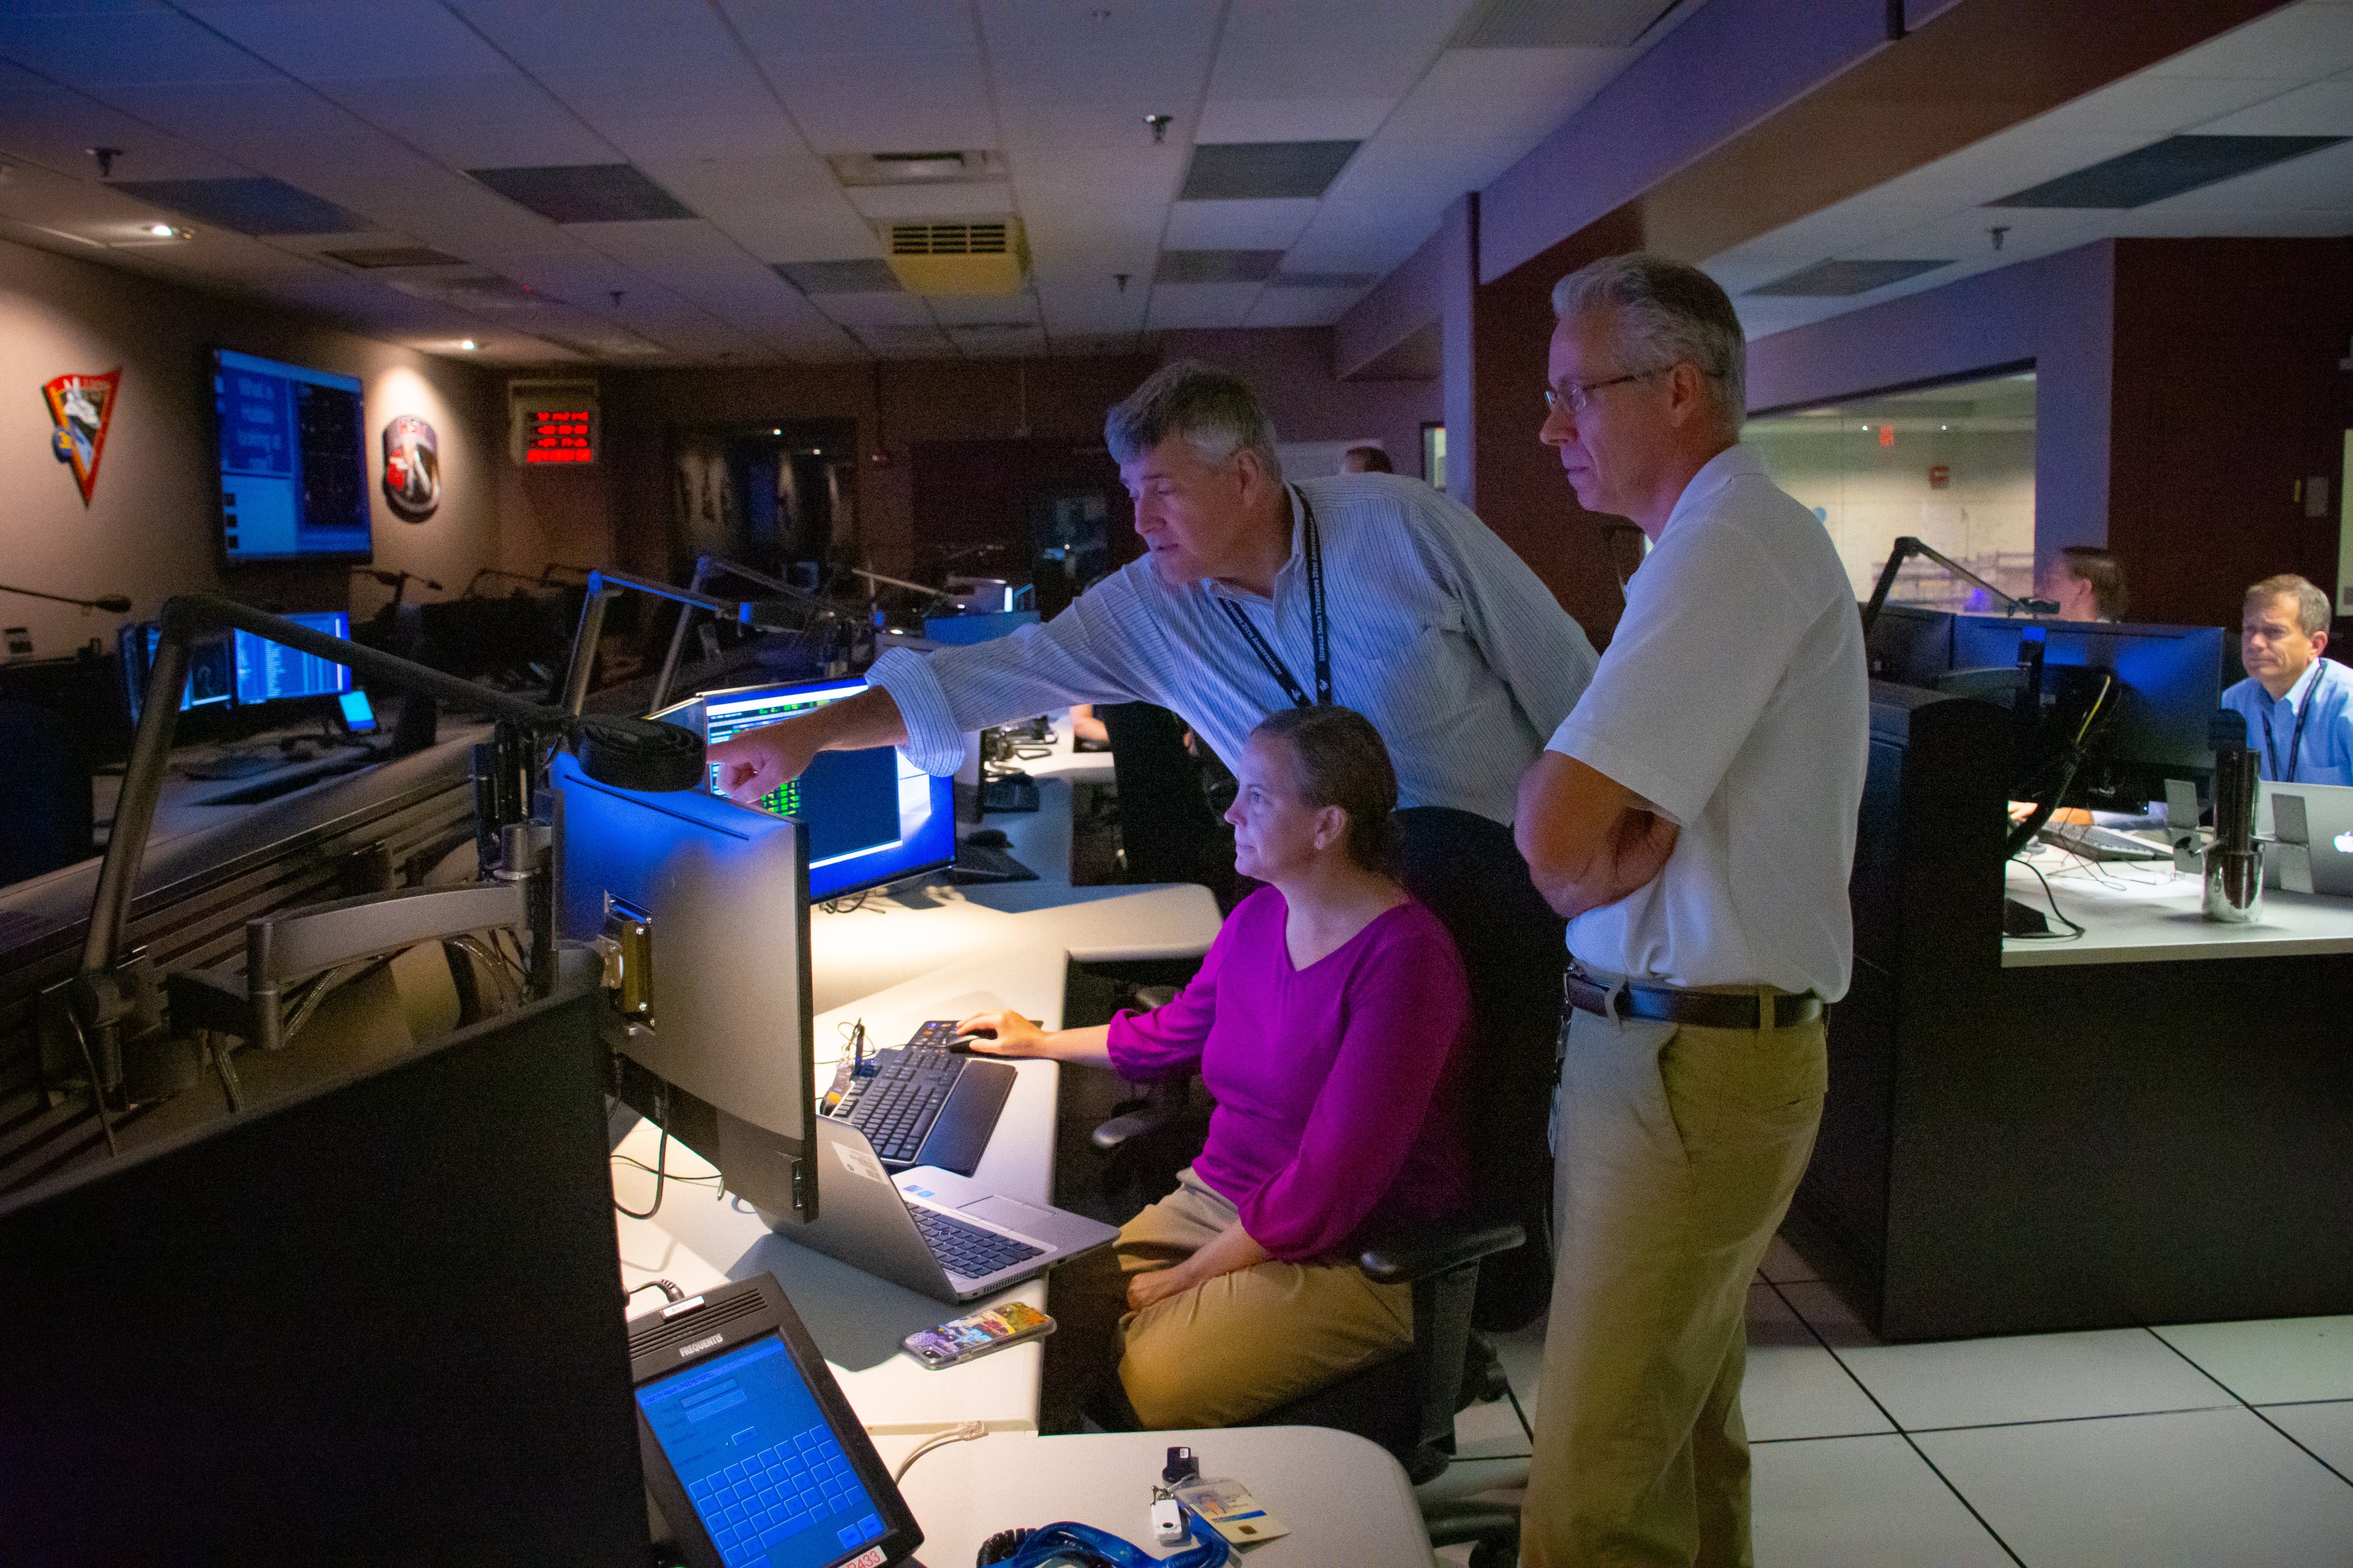 Three people discuss operations in the Hubble control center while looking at spacecraft data.